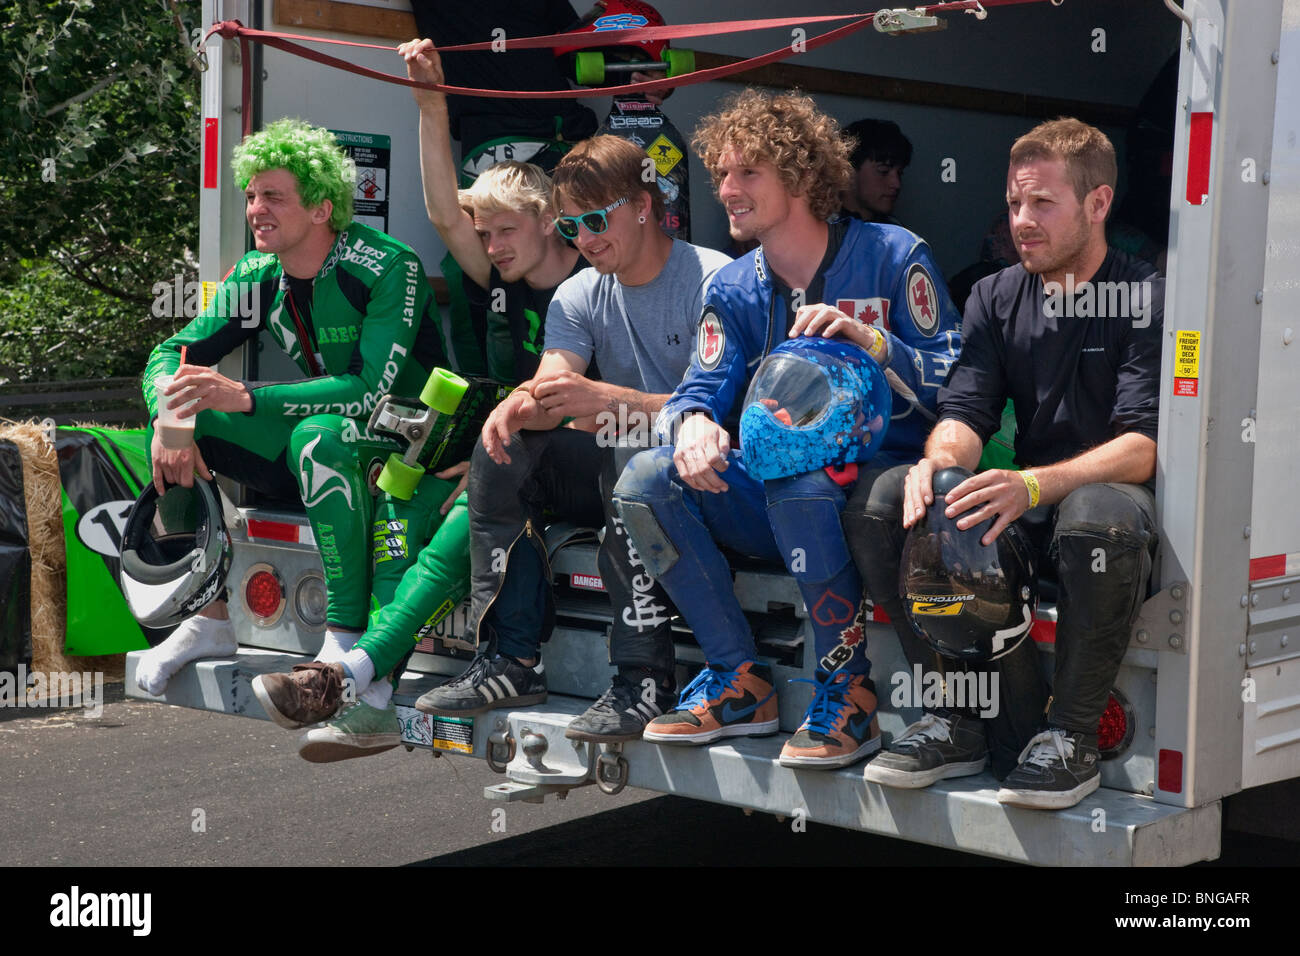 Skateboard competitors departing for starting gate, IGSA World Cup Series. Stock Photo